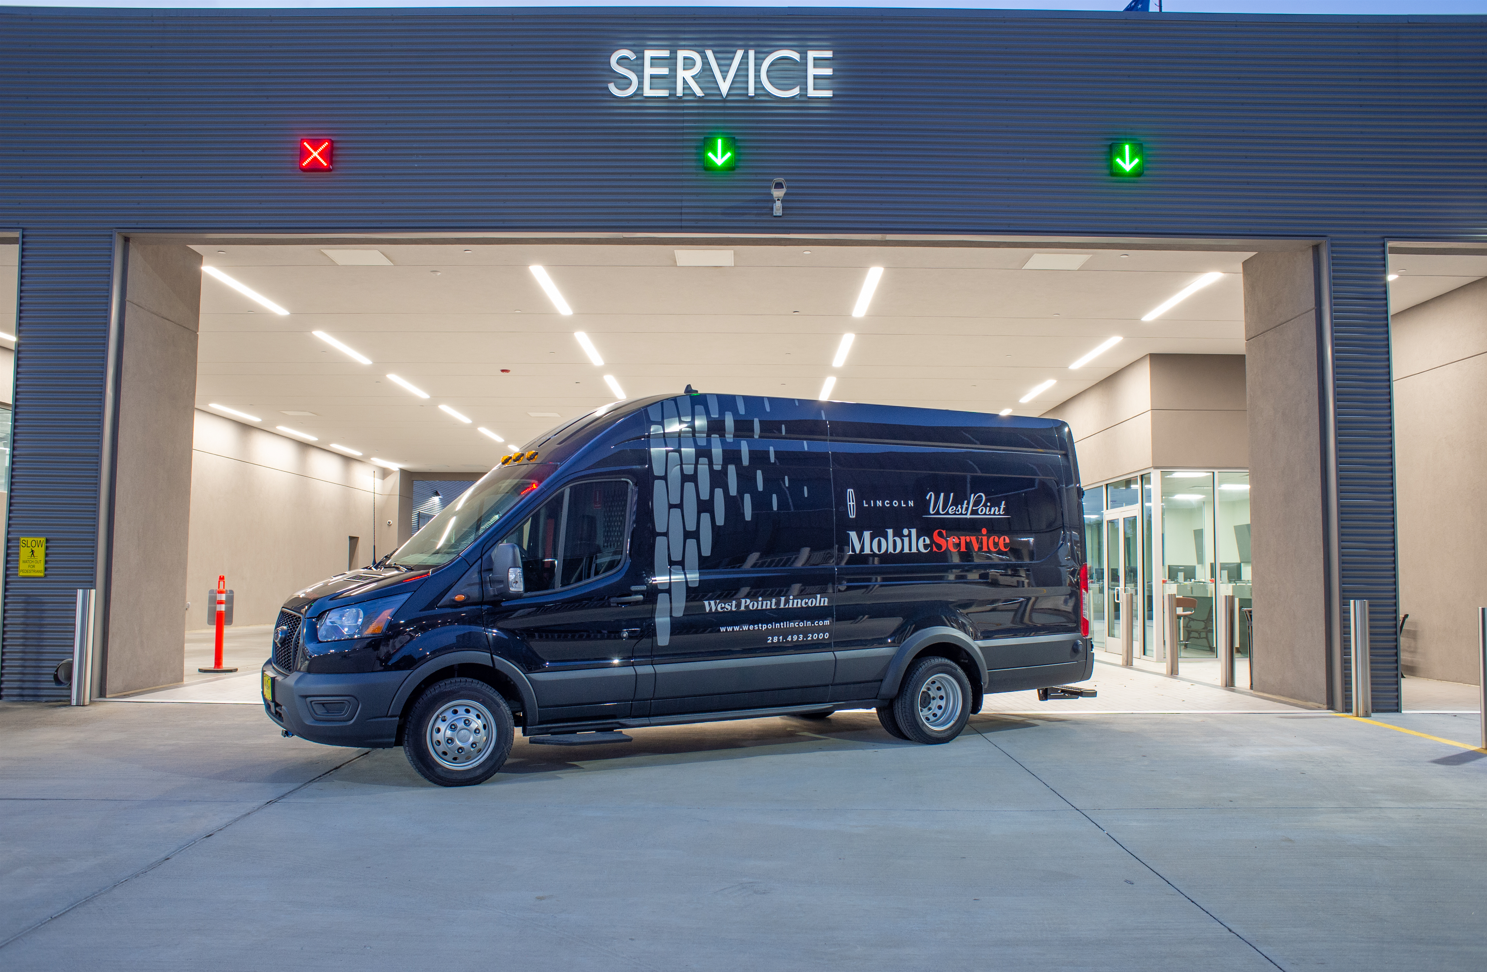 Mobile Service Van | West Point Lincoln in Houston TX